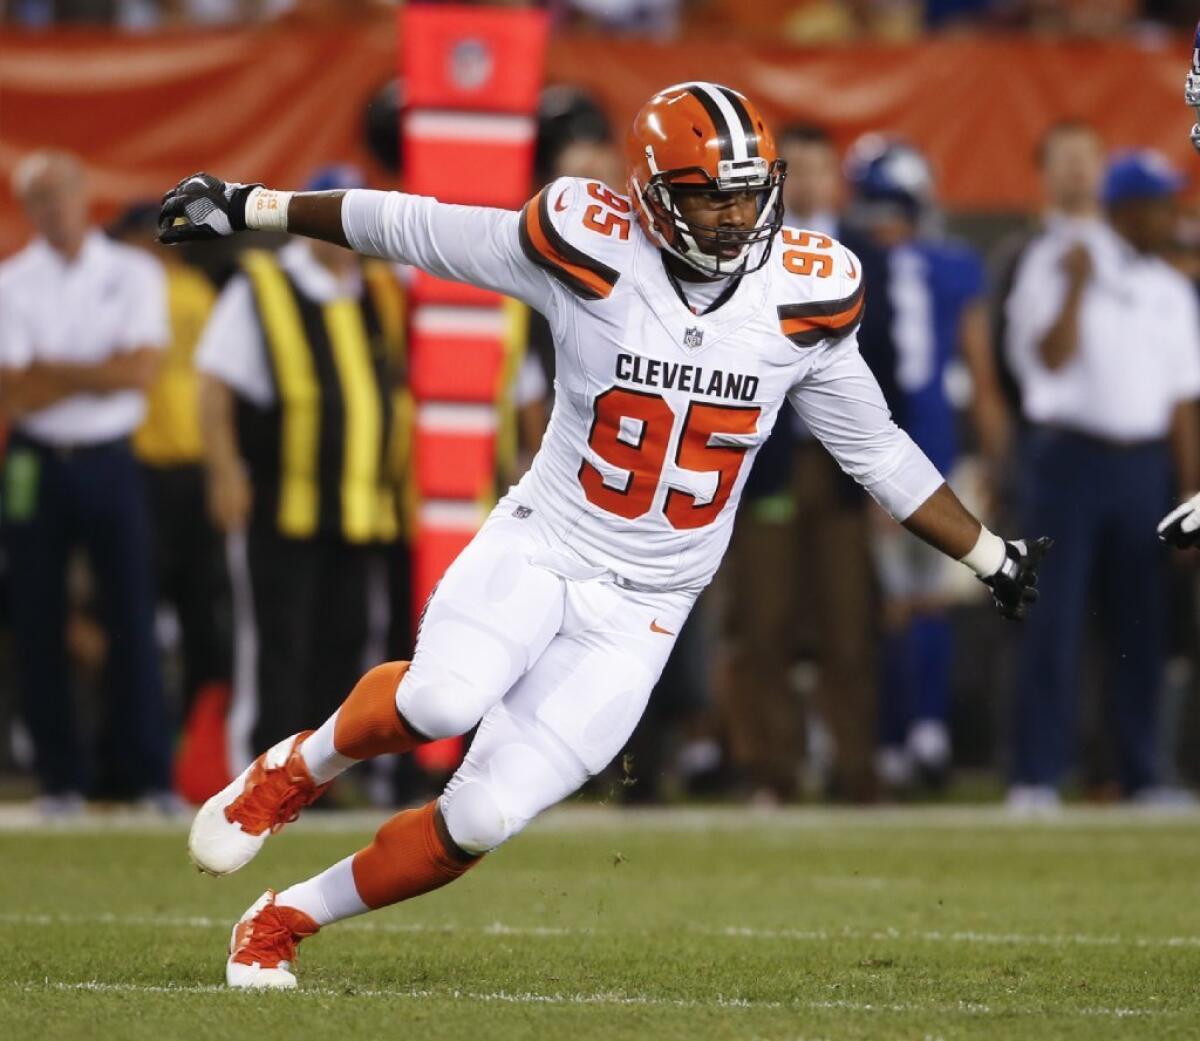 Browns defensive end Myles Garrett in action against the New York Giants during a preseason game Aug. 21.